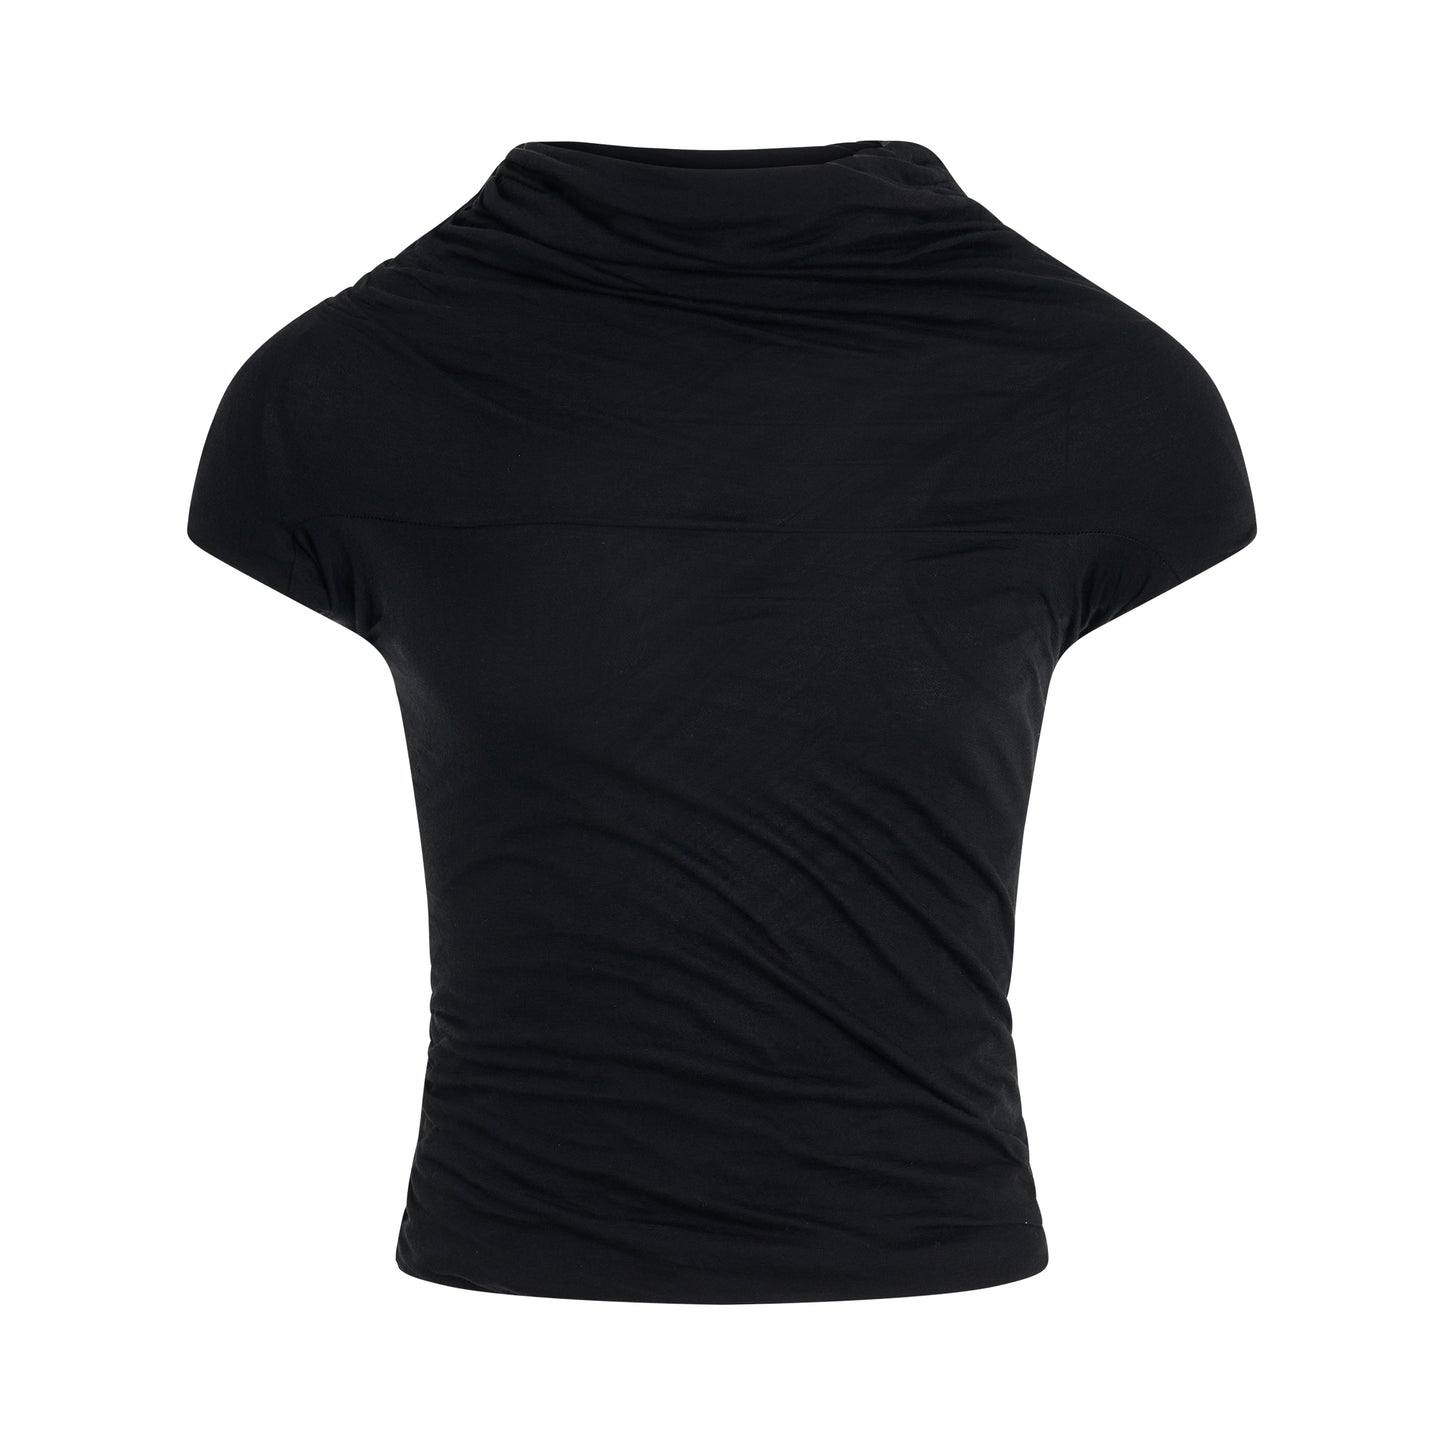 Banded T-Shirt II in Black